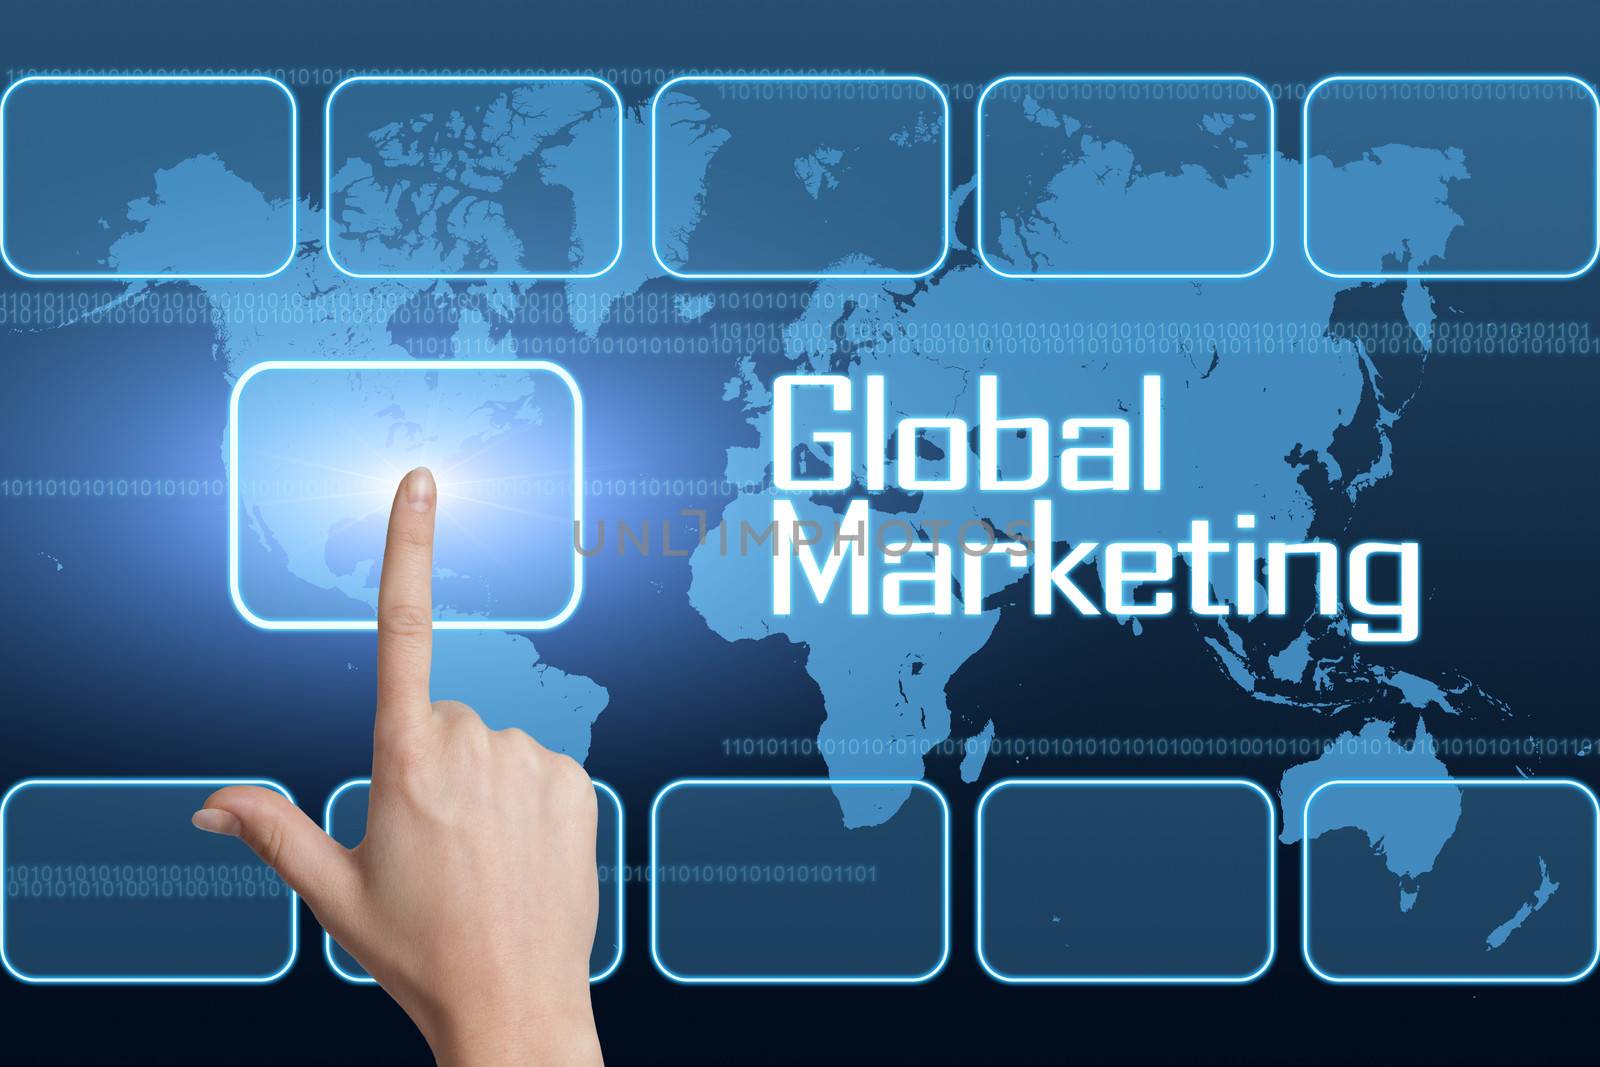 Global Marketing concept with interface and world map on blue background